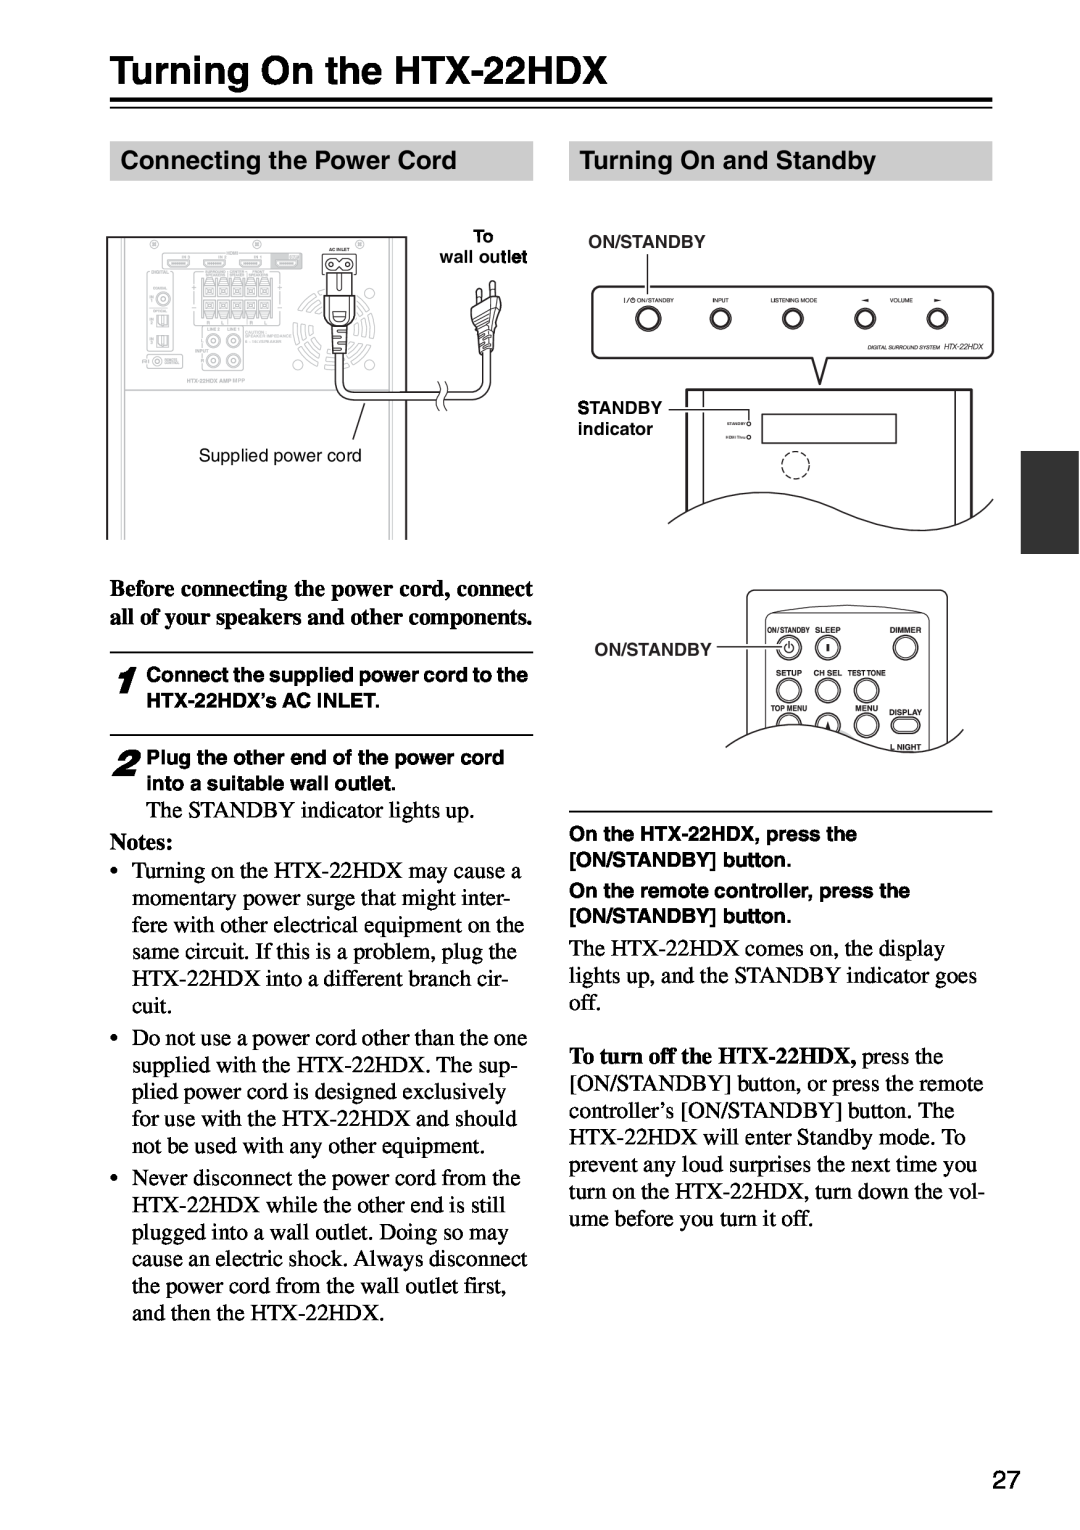 Onkyo HTX-22HDXST, HTX-22HDXPAW Turning On the HTX-22HDX, Connecting the Power Cord, Turning On and Standby 